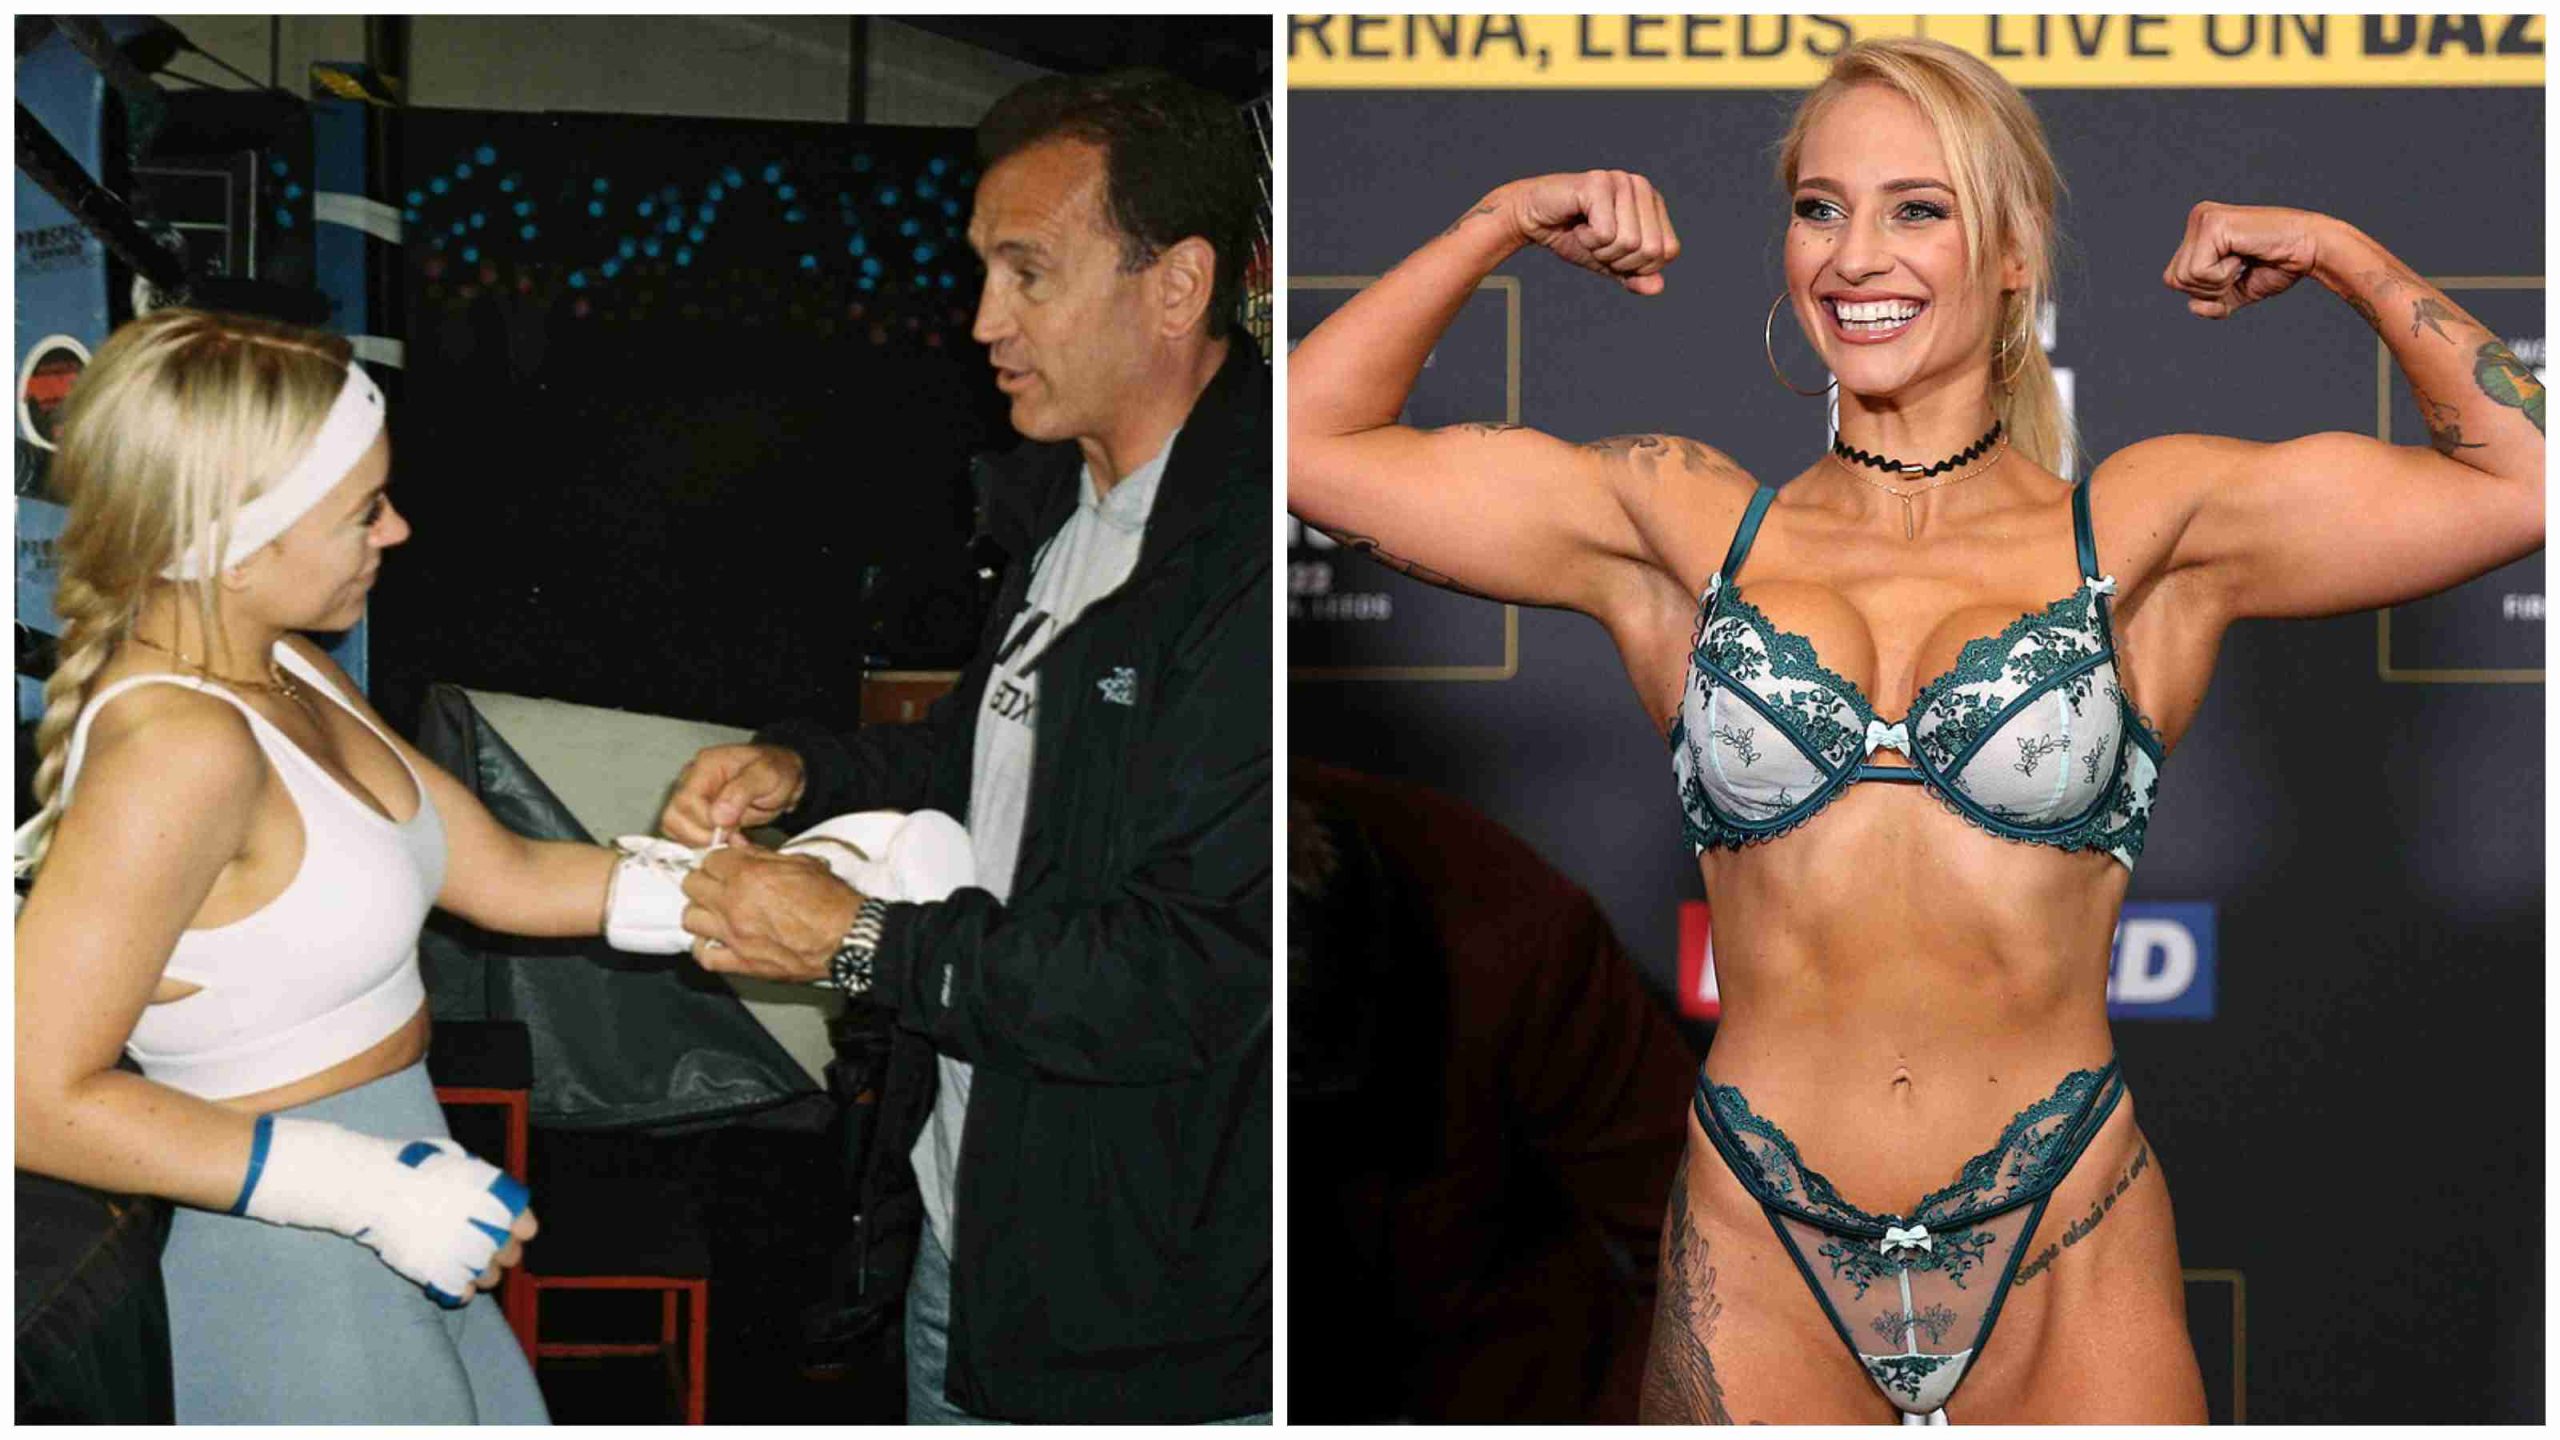 OnlyFans star Elle Brooke taking cues from Floyd Mayweather ahead of boxing debut on July 16 - THE SPORTS ROOM